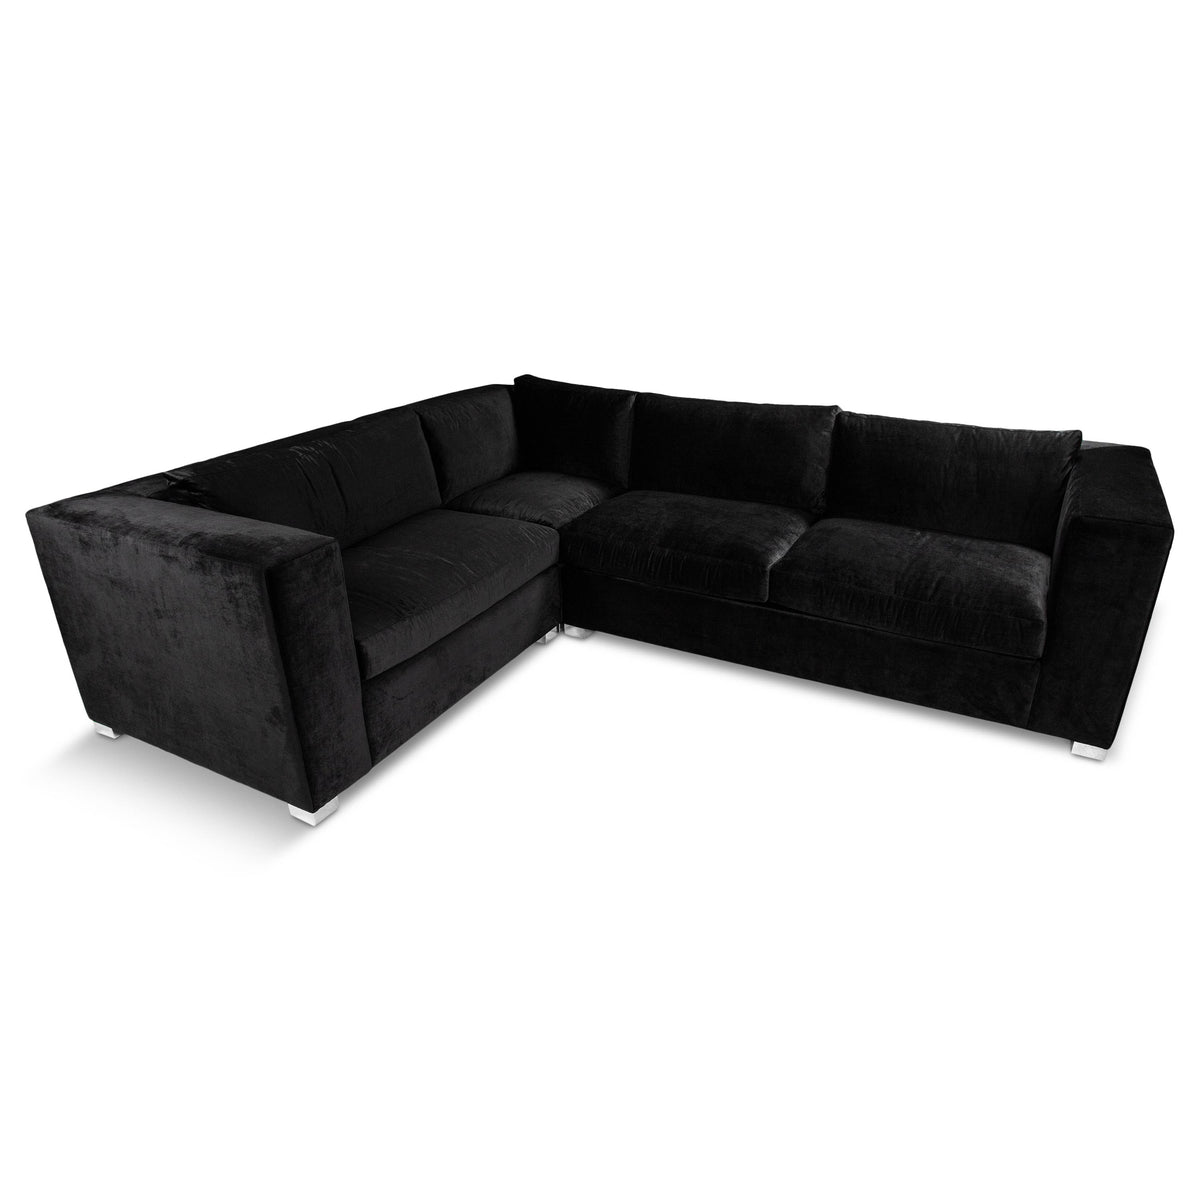 Mr. Smith Sectional